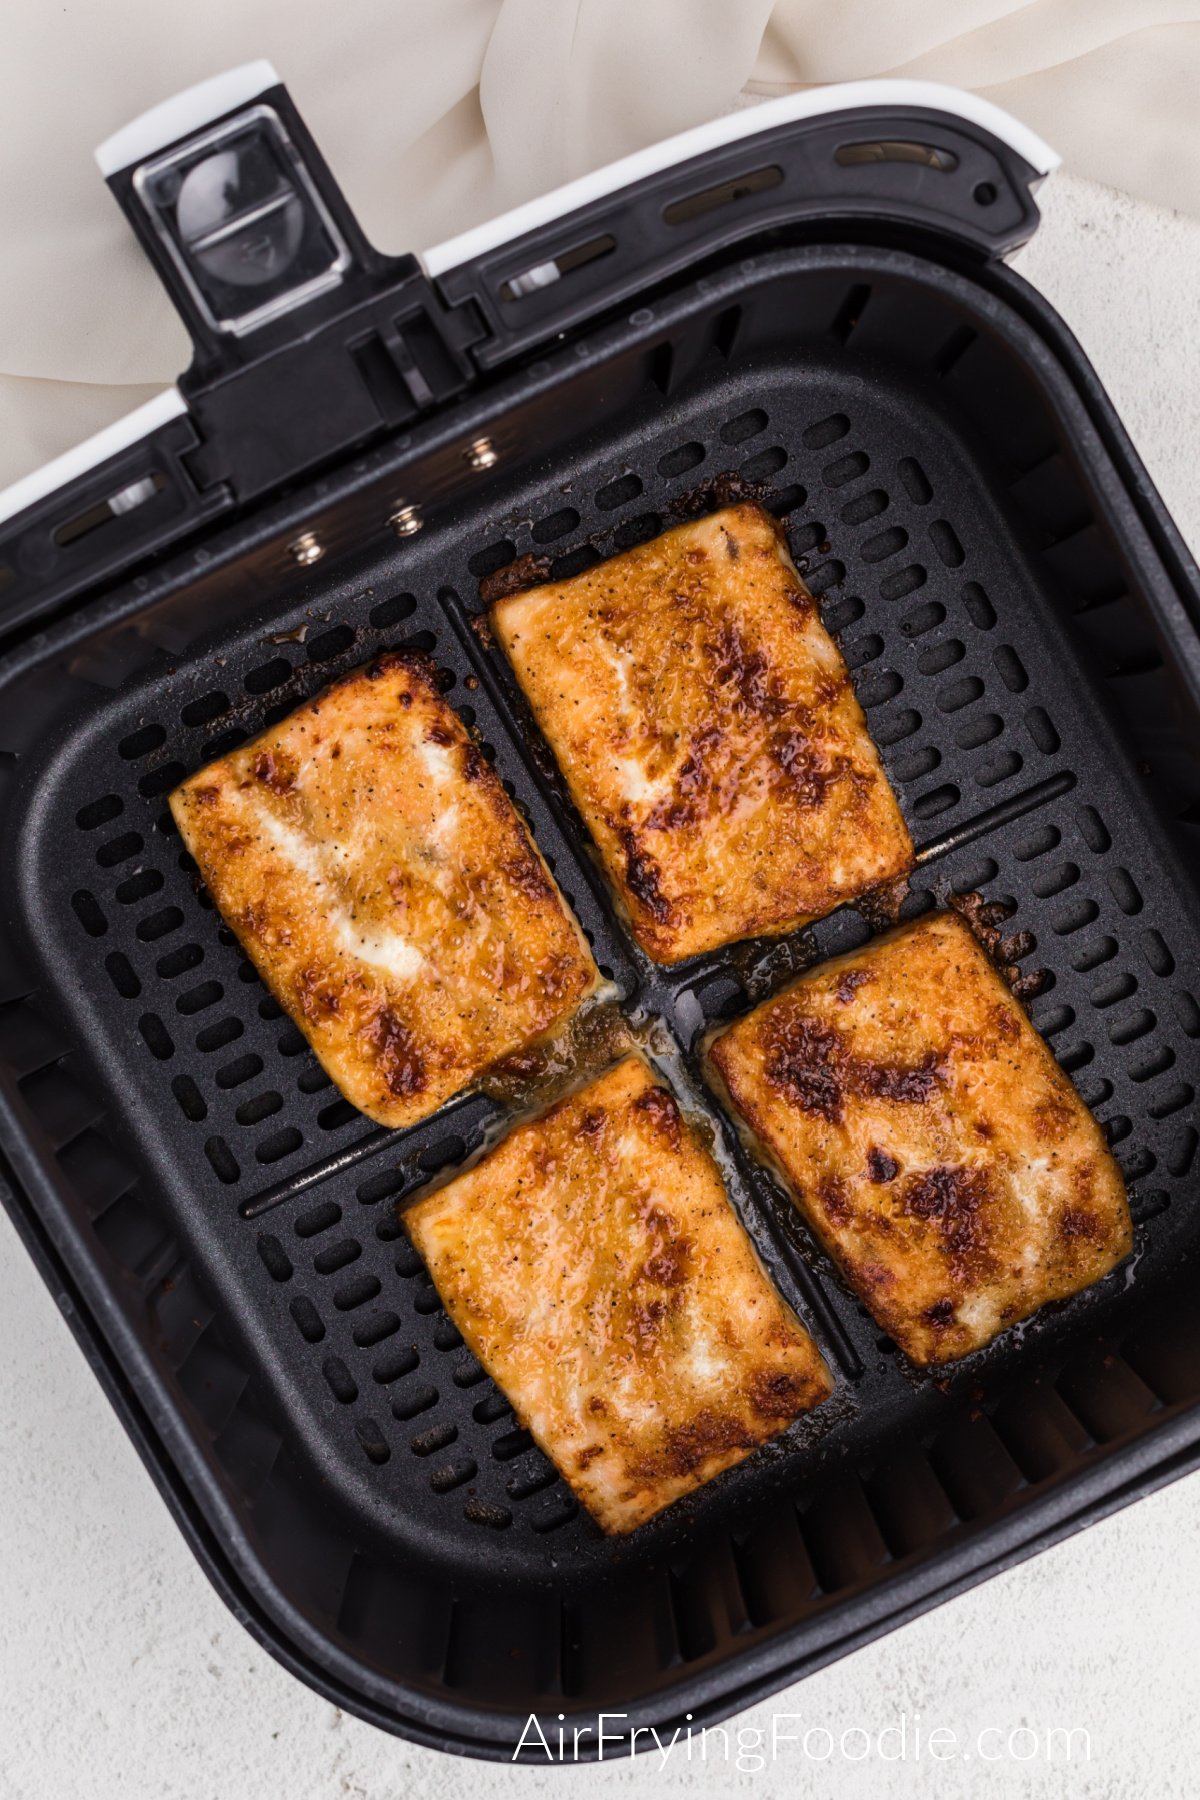 fully cooked from frozen salmon in air fryer basket ready to serve.